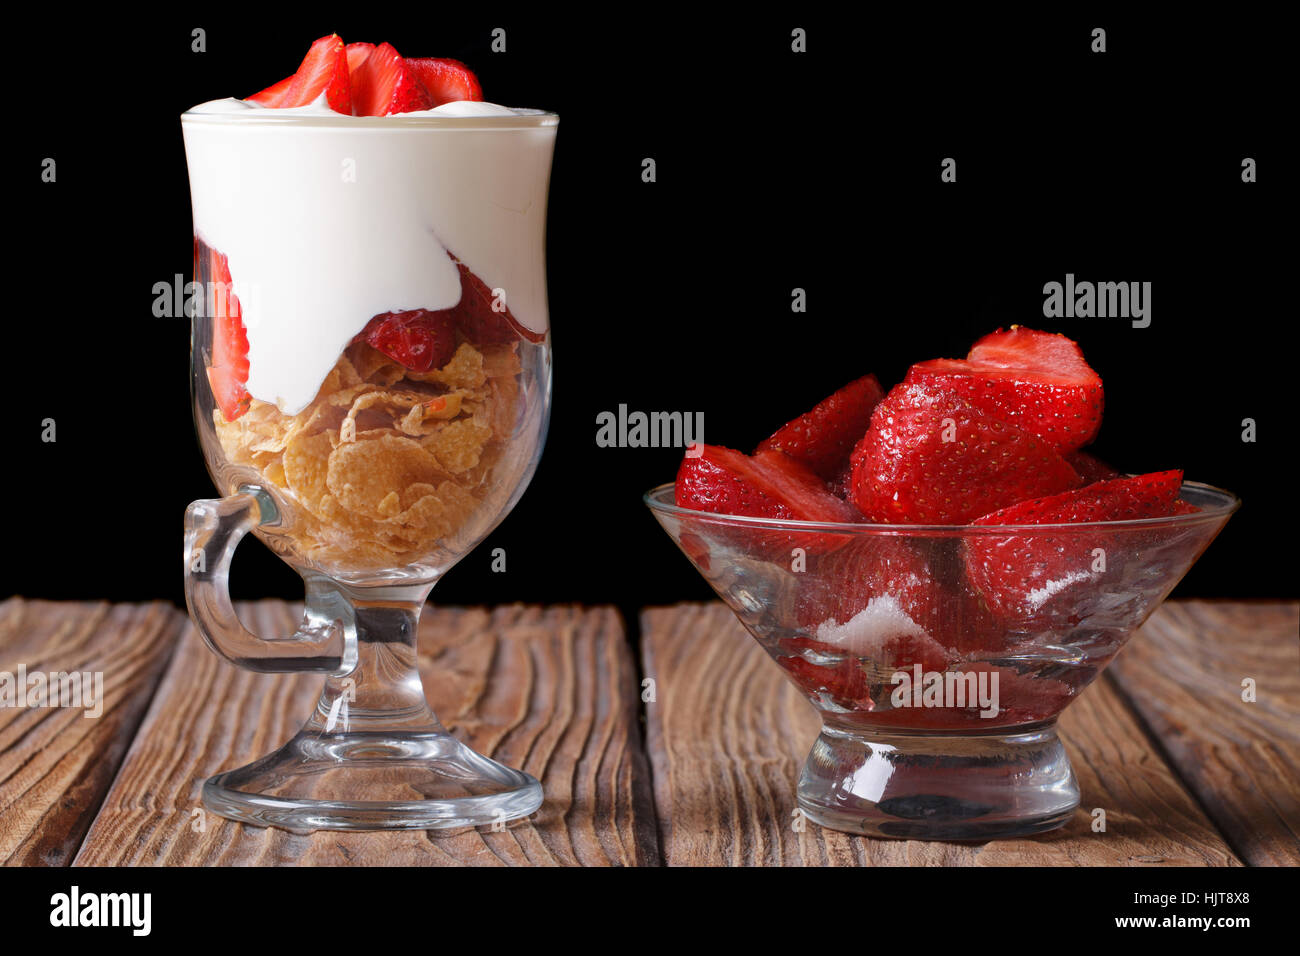 yogurt with strawberries and cornflakes in a glass closeup on a wooden table. horizontal. low key Stock Photo